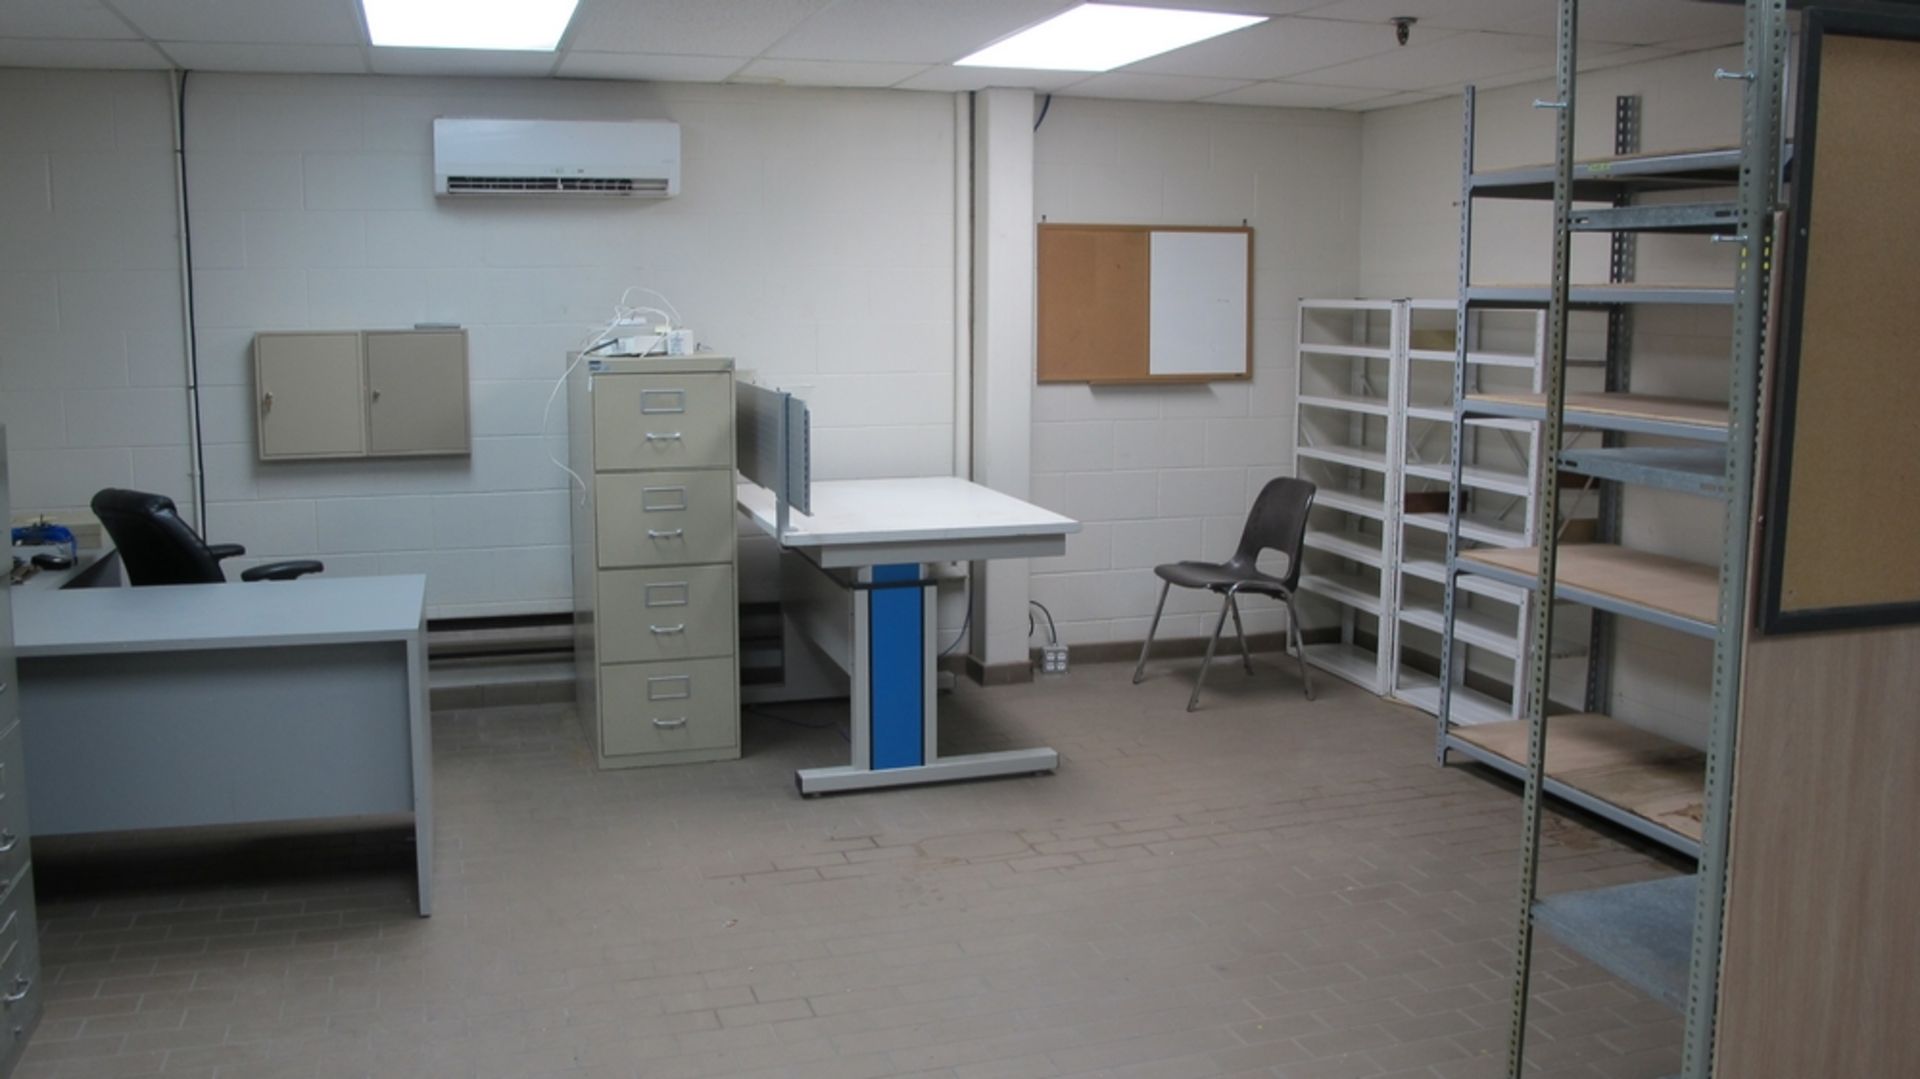 LOT OF CONTENTS OF MAINTENANCE OFFICE (6 SHELVING UNITS, 2 DESKS, 2 CHAIRS AND 2 FILE CABINETS) (100